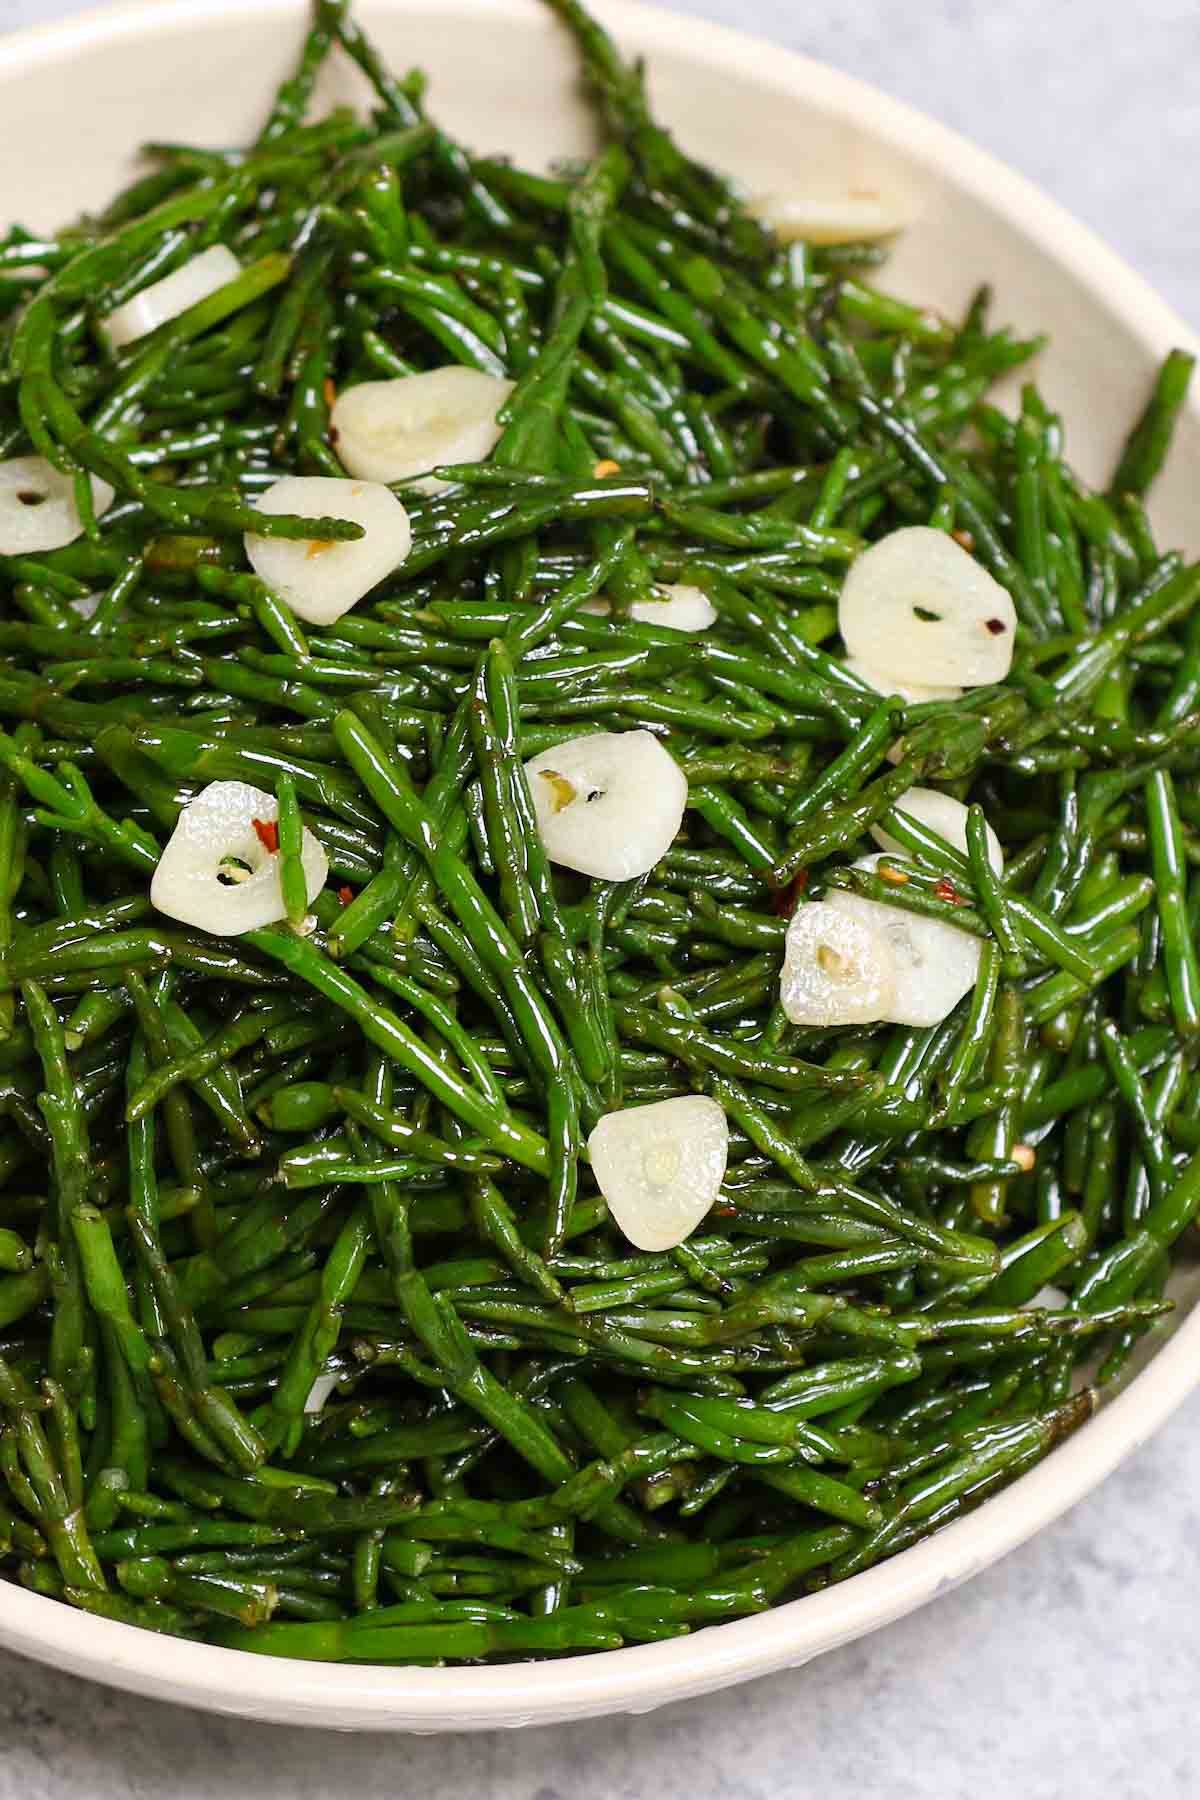 A serving platter full of samphire cooked with garlic